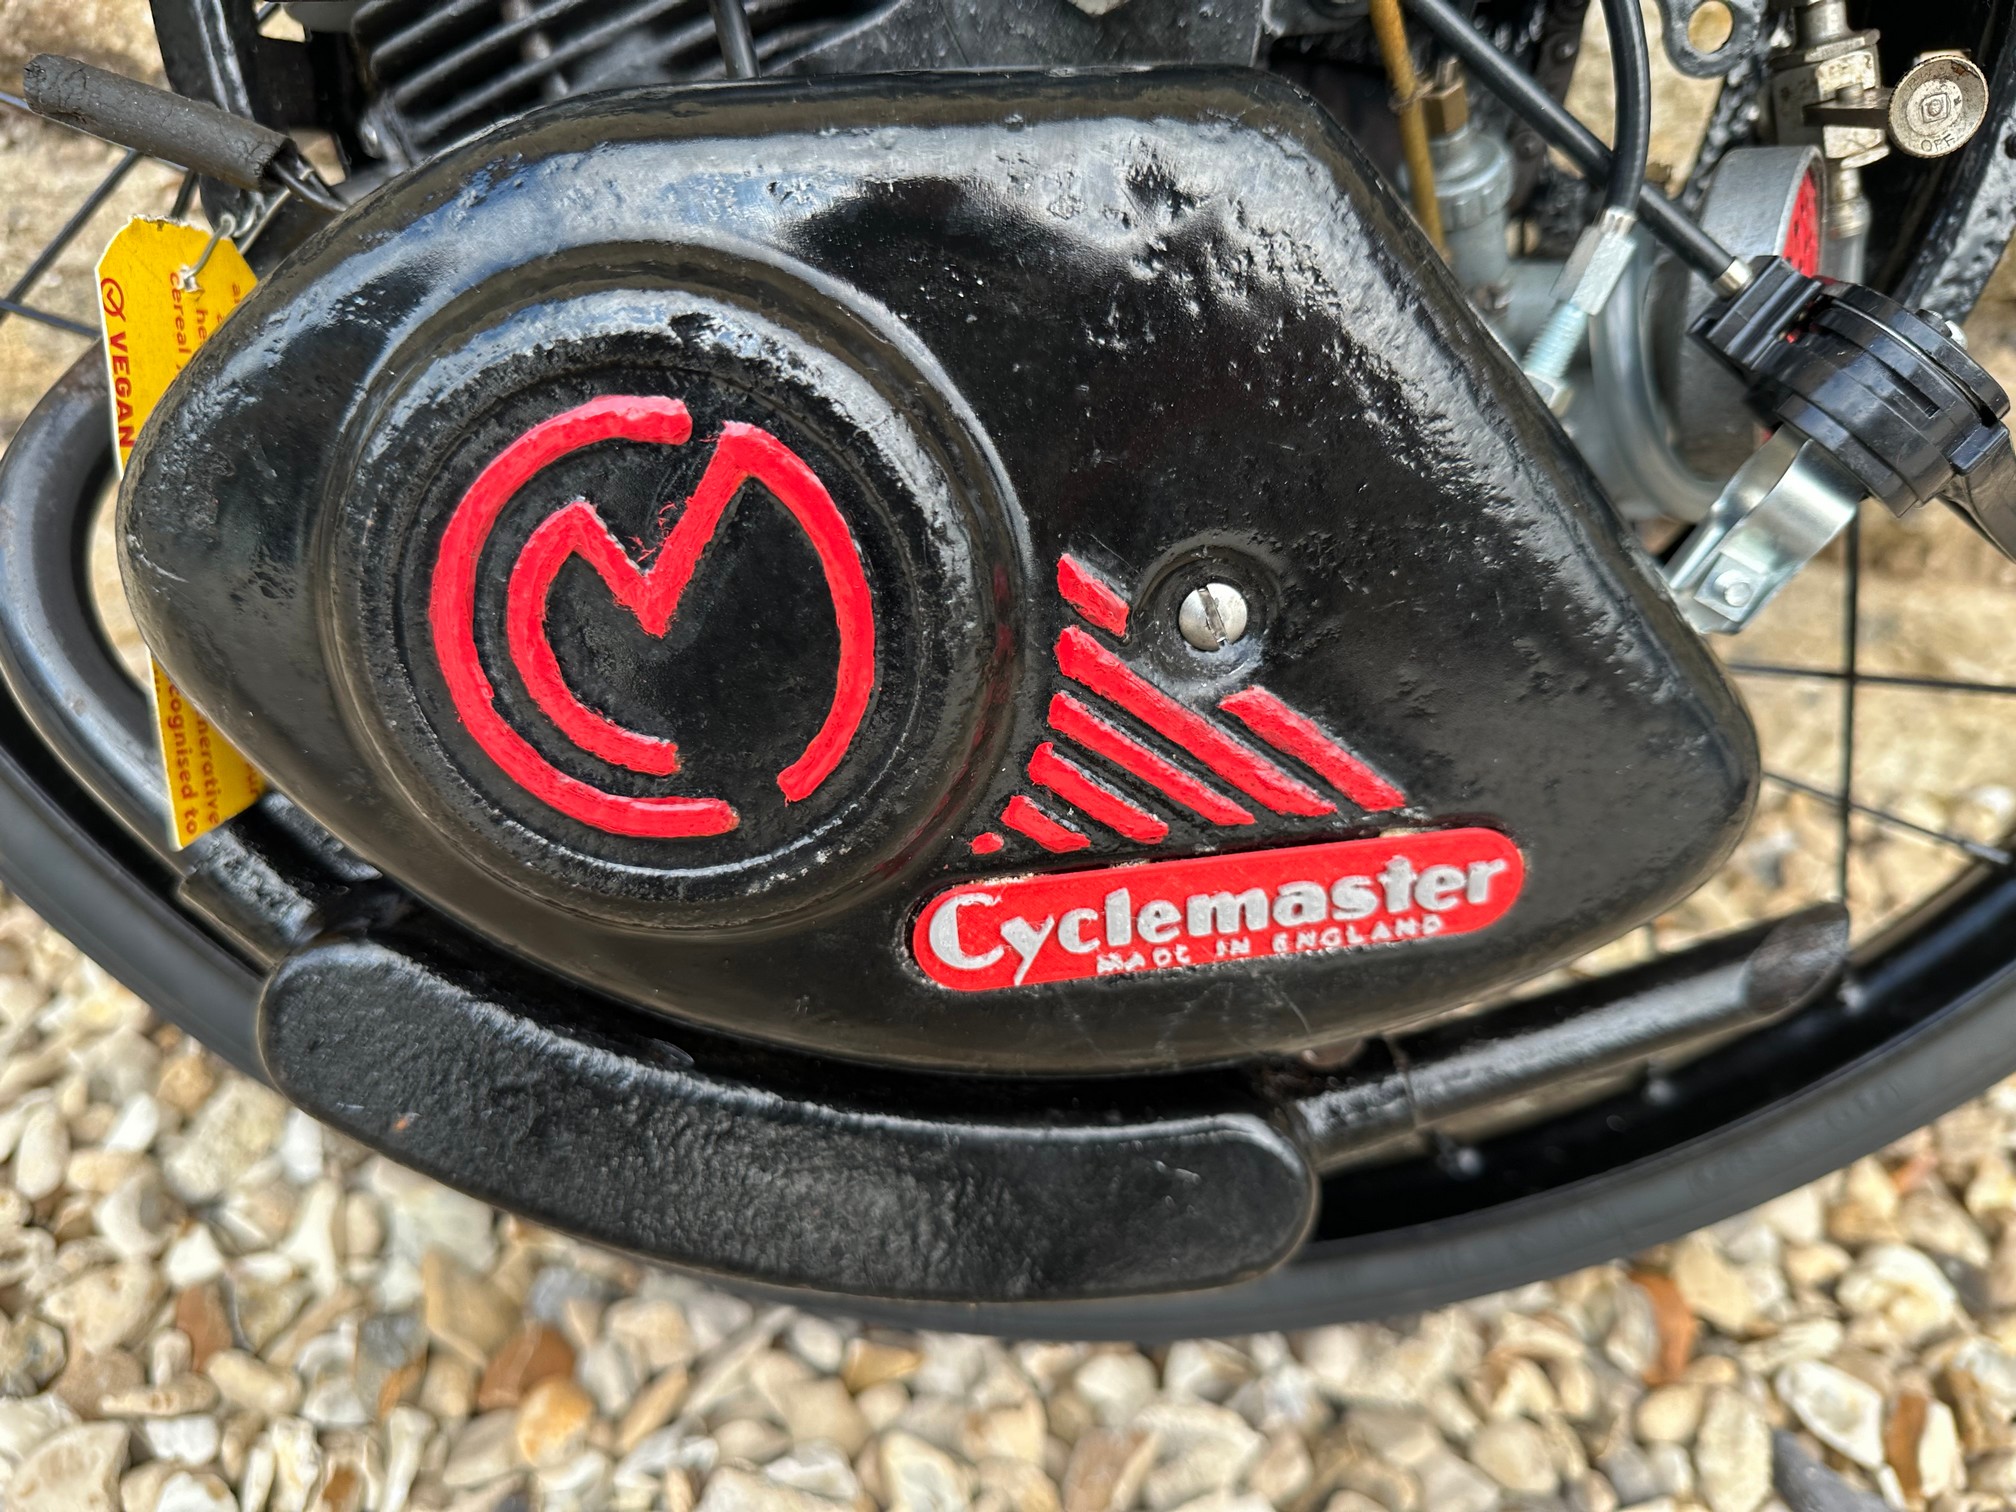 Cyclemaster 32cc Reg. no. n/a Frame no. n/a Engine no. A85802 This Cyclemaster - Image 2 of 5